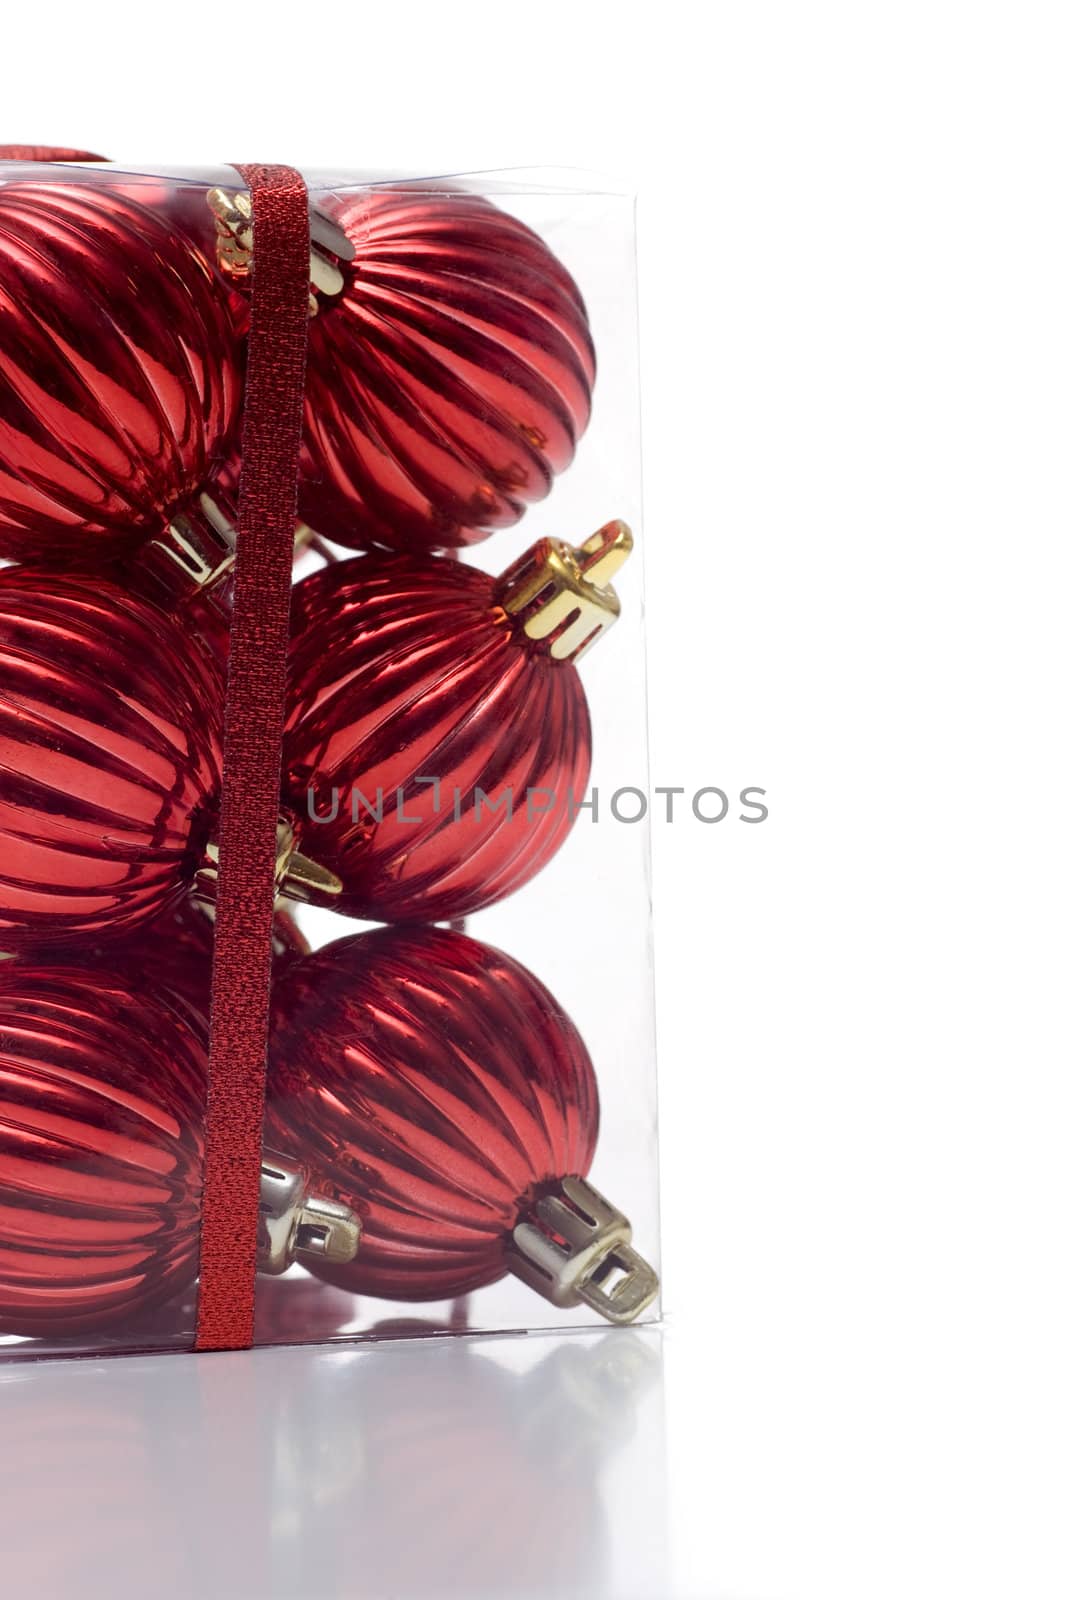 Bunch of red boxed ornaments with ribbon by woodygraphs